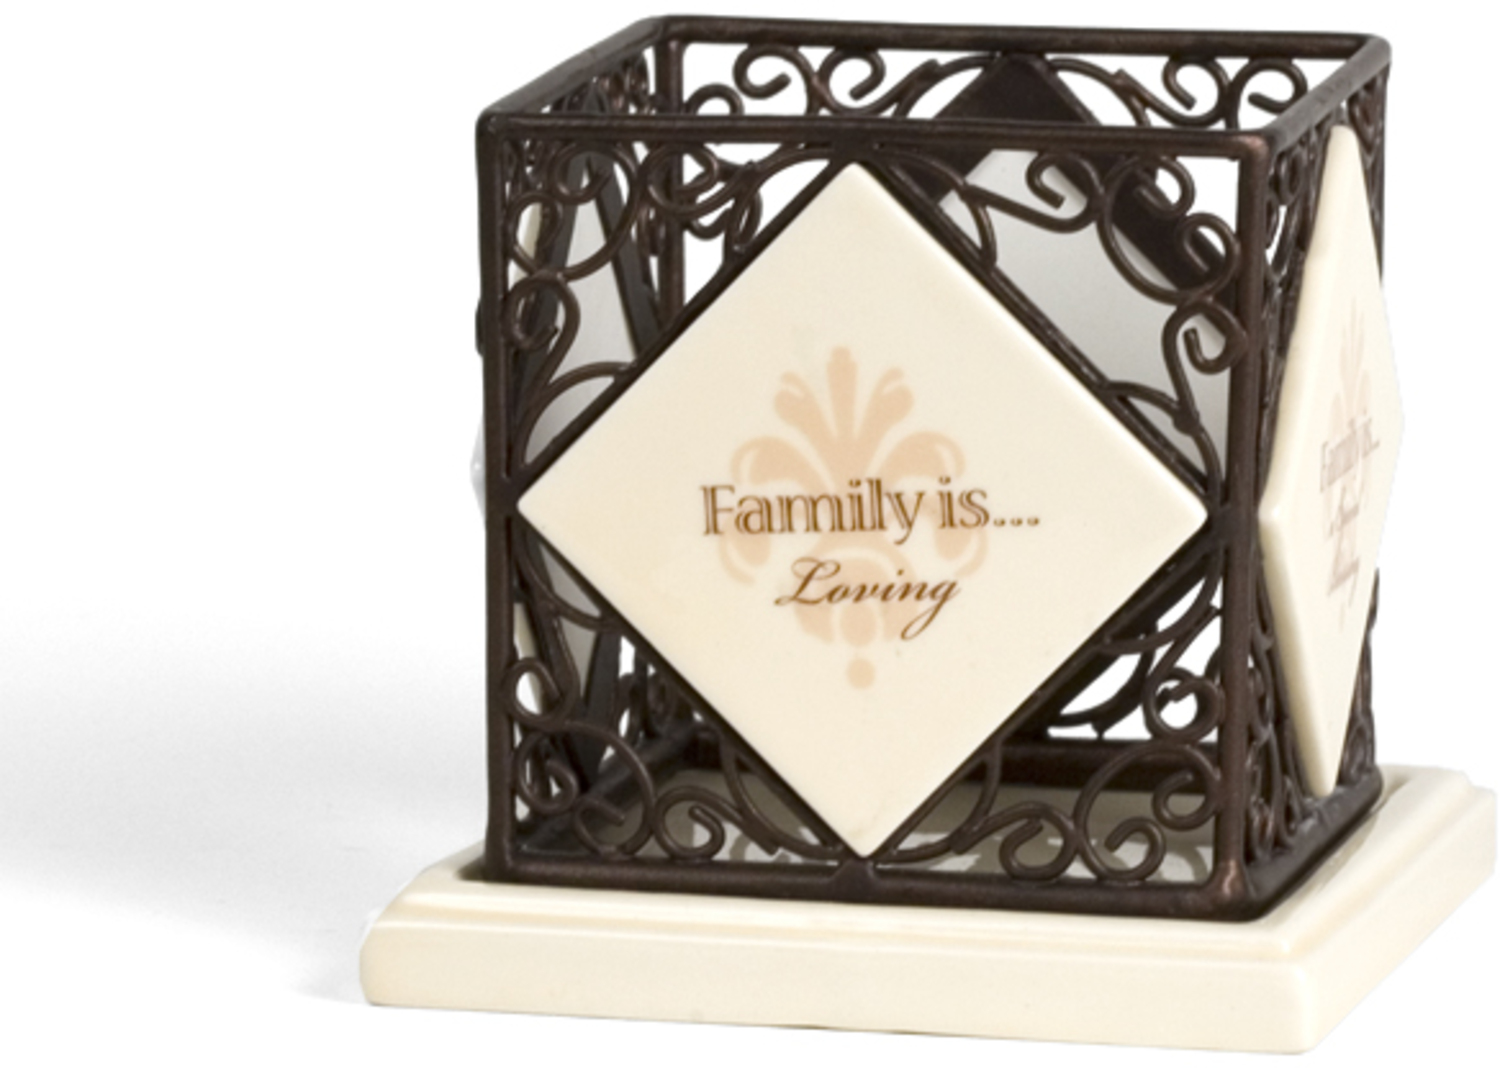 Family by Simply Stated - Family - 4.25" Square Candle Holder